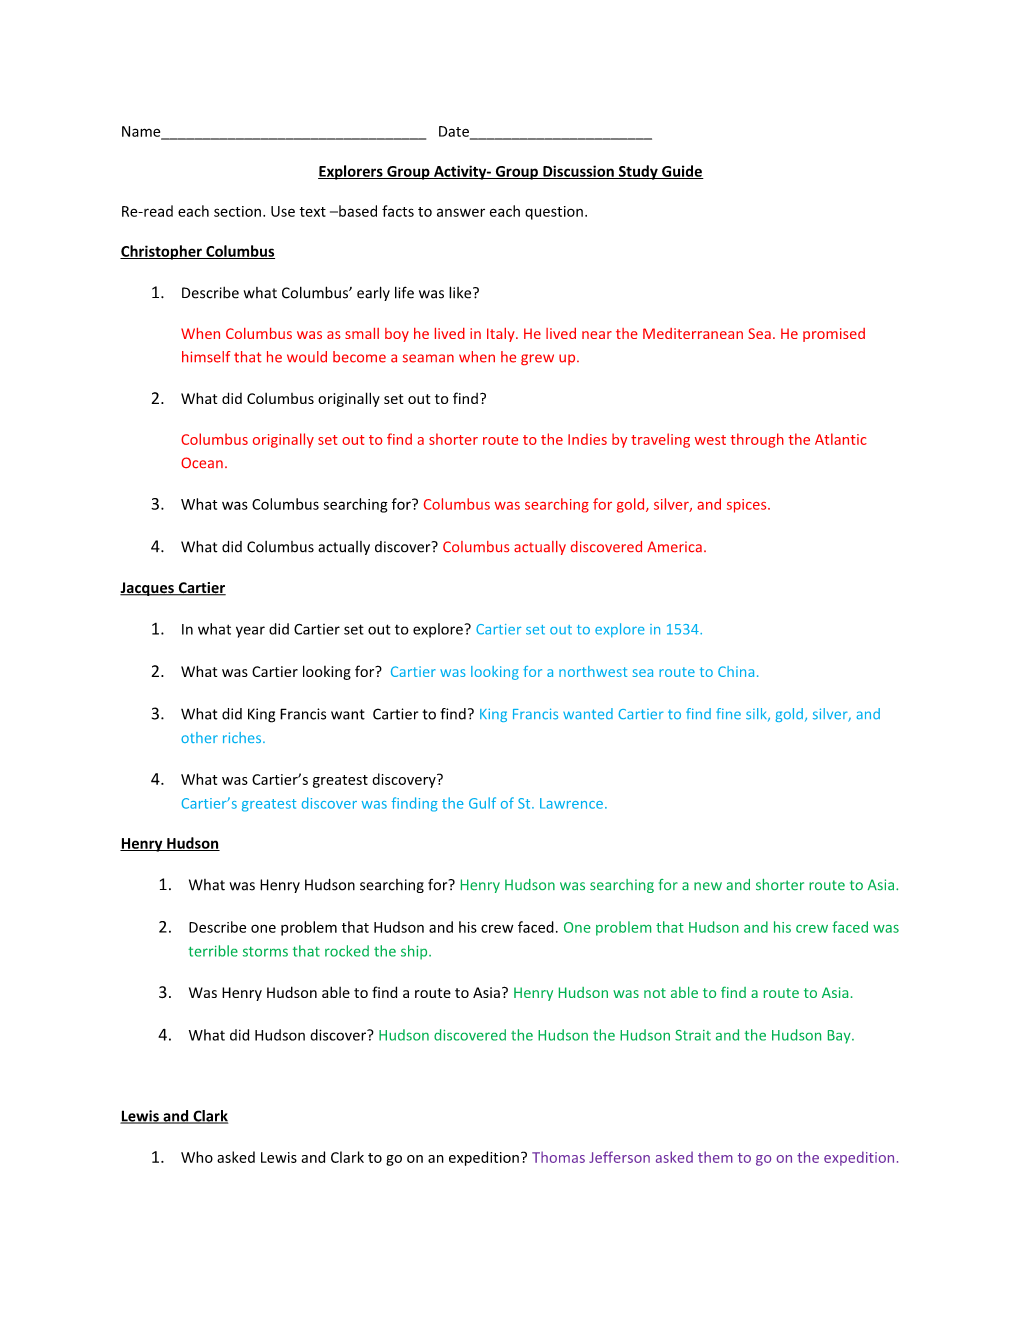 Explorers Group Activity- Group Discussion Study Guide